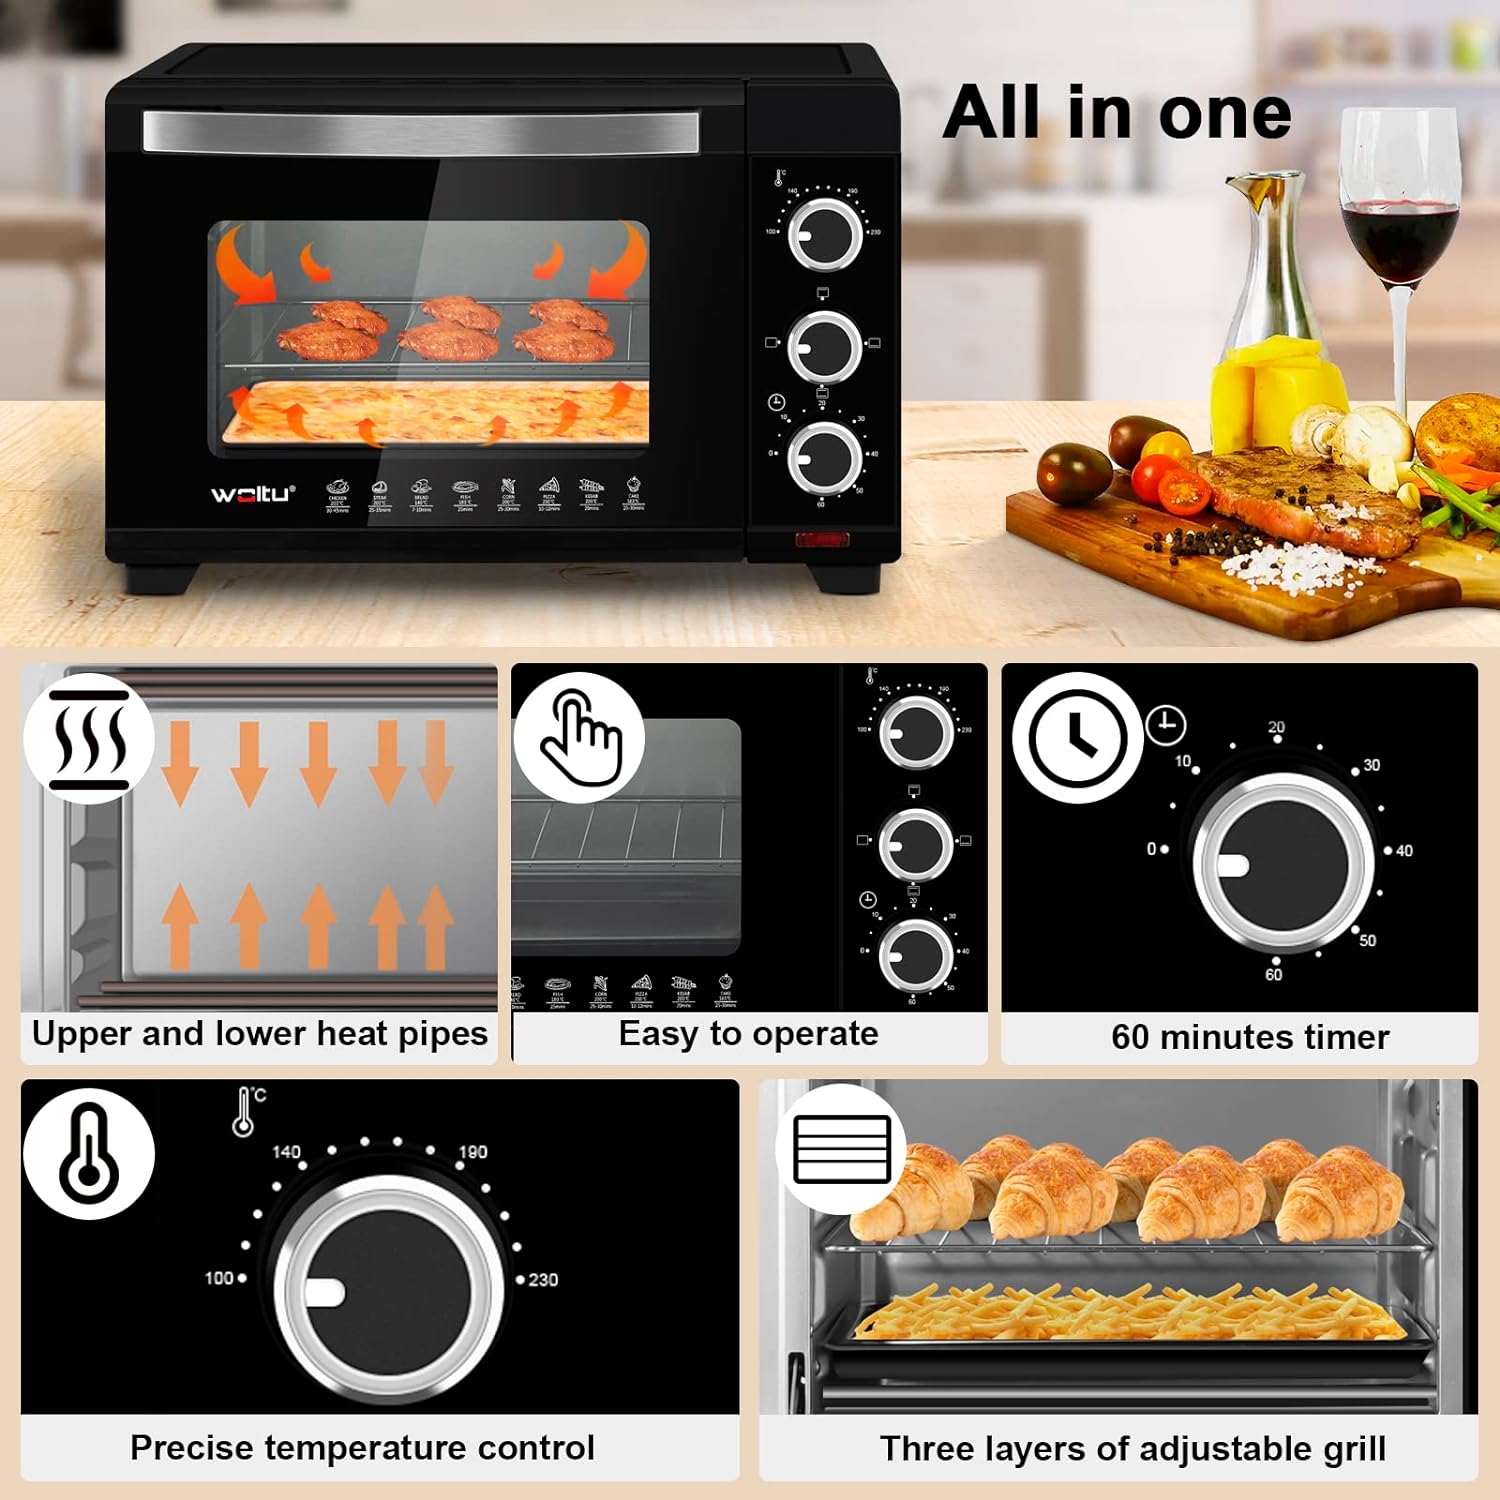 WOLTU Mini Oven 21L, Toaster Oven Electric Oven, Small Oven Countertop Oven with Knobs, 60 - Minute Timer, 100 - 230°C Thermostat, 1280W, Double Glazed Door, Top/Bottom Heating, Black - Amazing Gadgets Outlet